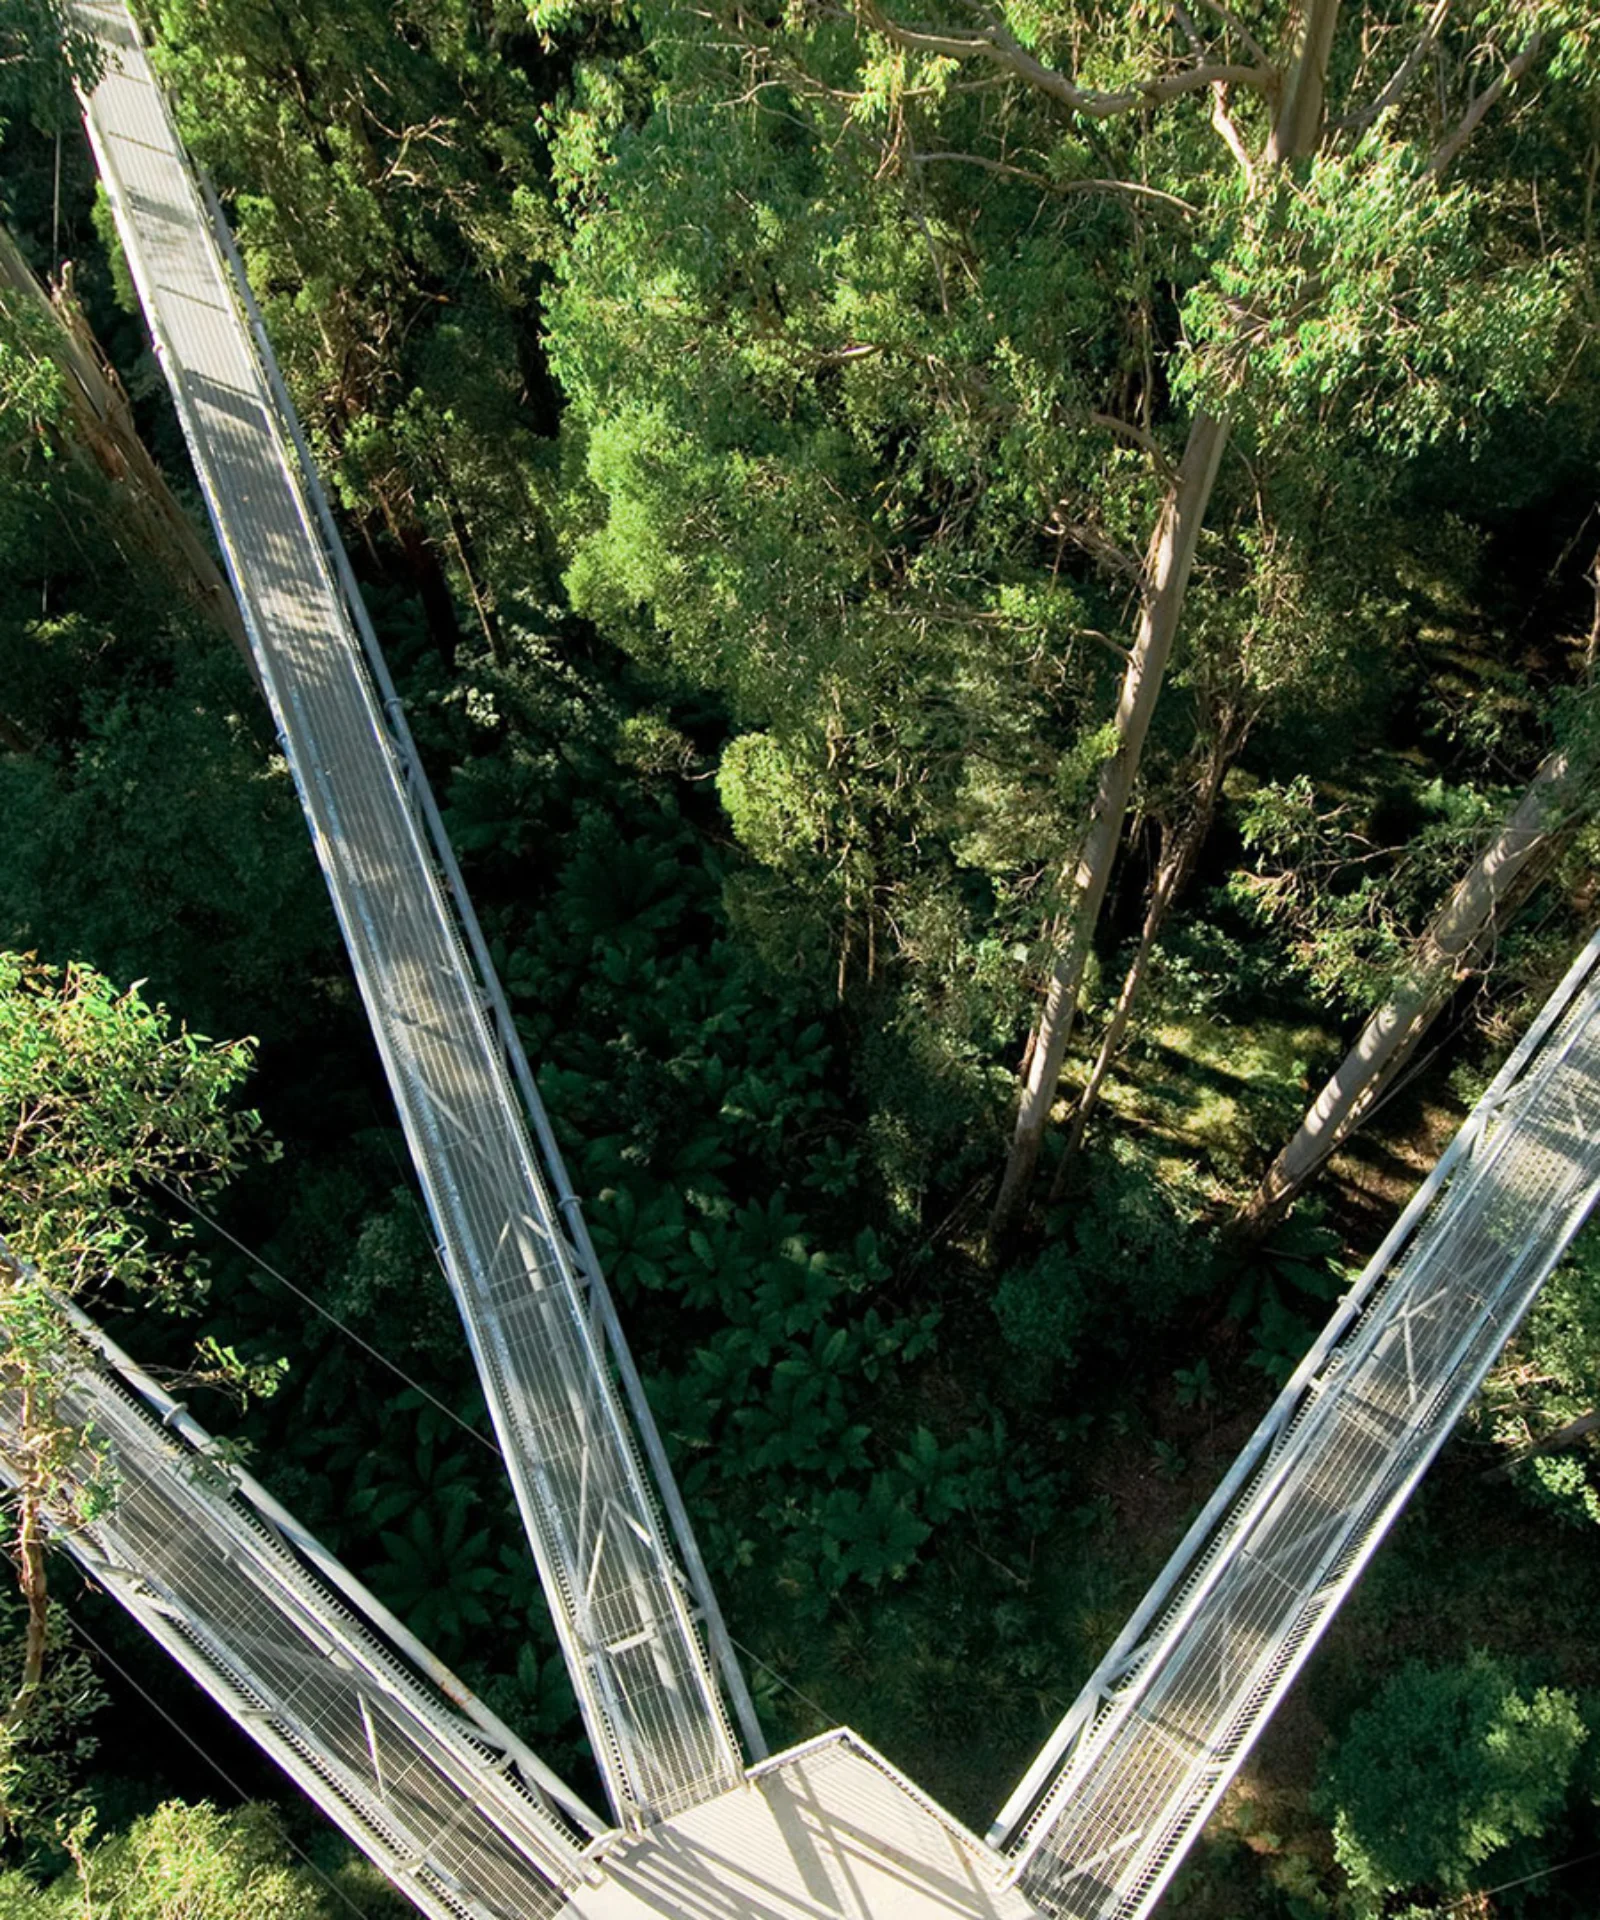 This visual represents the concept of GreenCoding through an aerial view of three elevated walkways converging in a dense forest canopy. The image symbolises the three interconnected pillars of GreenCoding, emphasizing sustainability, efficiency, and innovation in software development practices. The green forest background reinforces the environmental focus of GreenCoding initiatives.